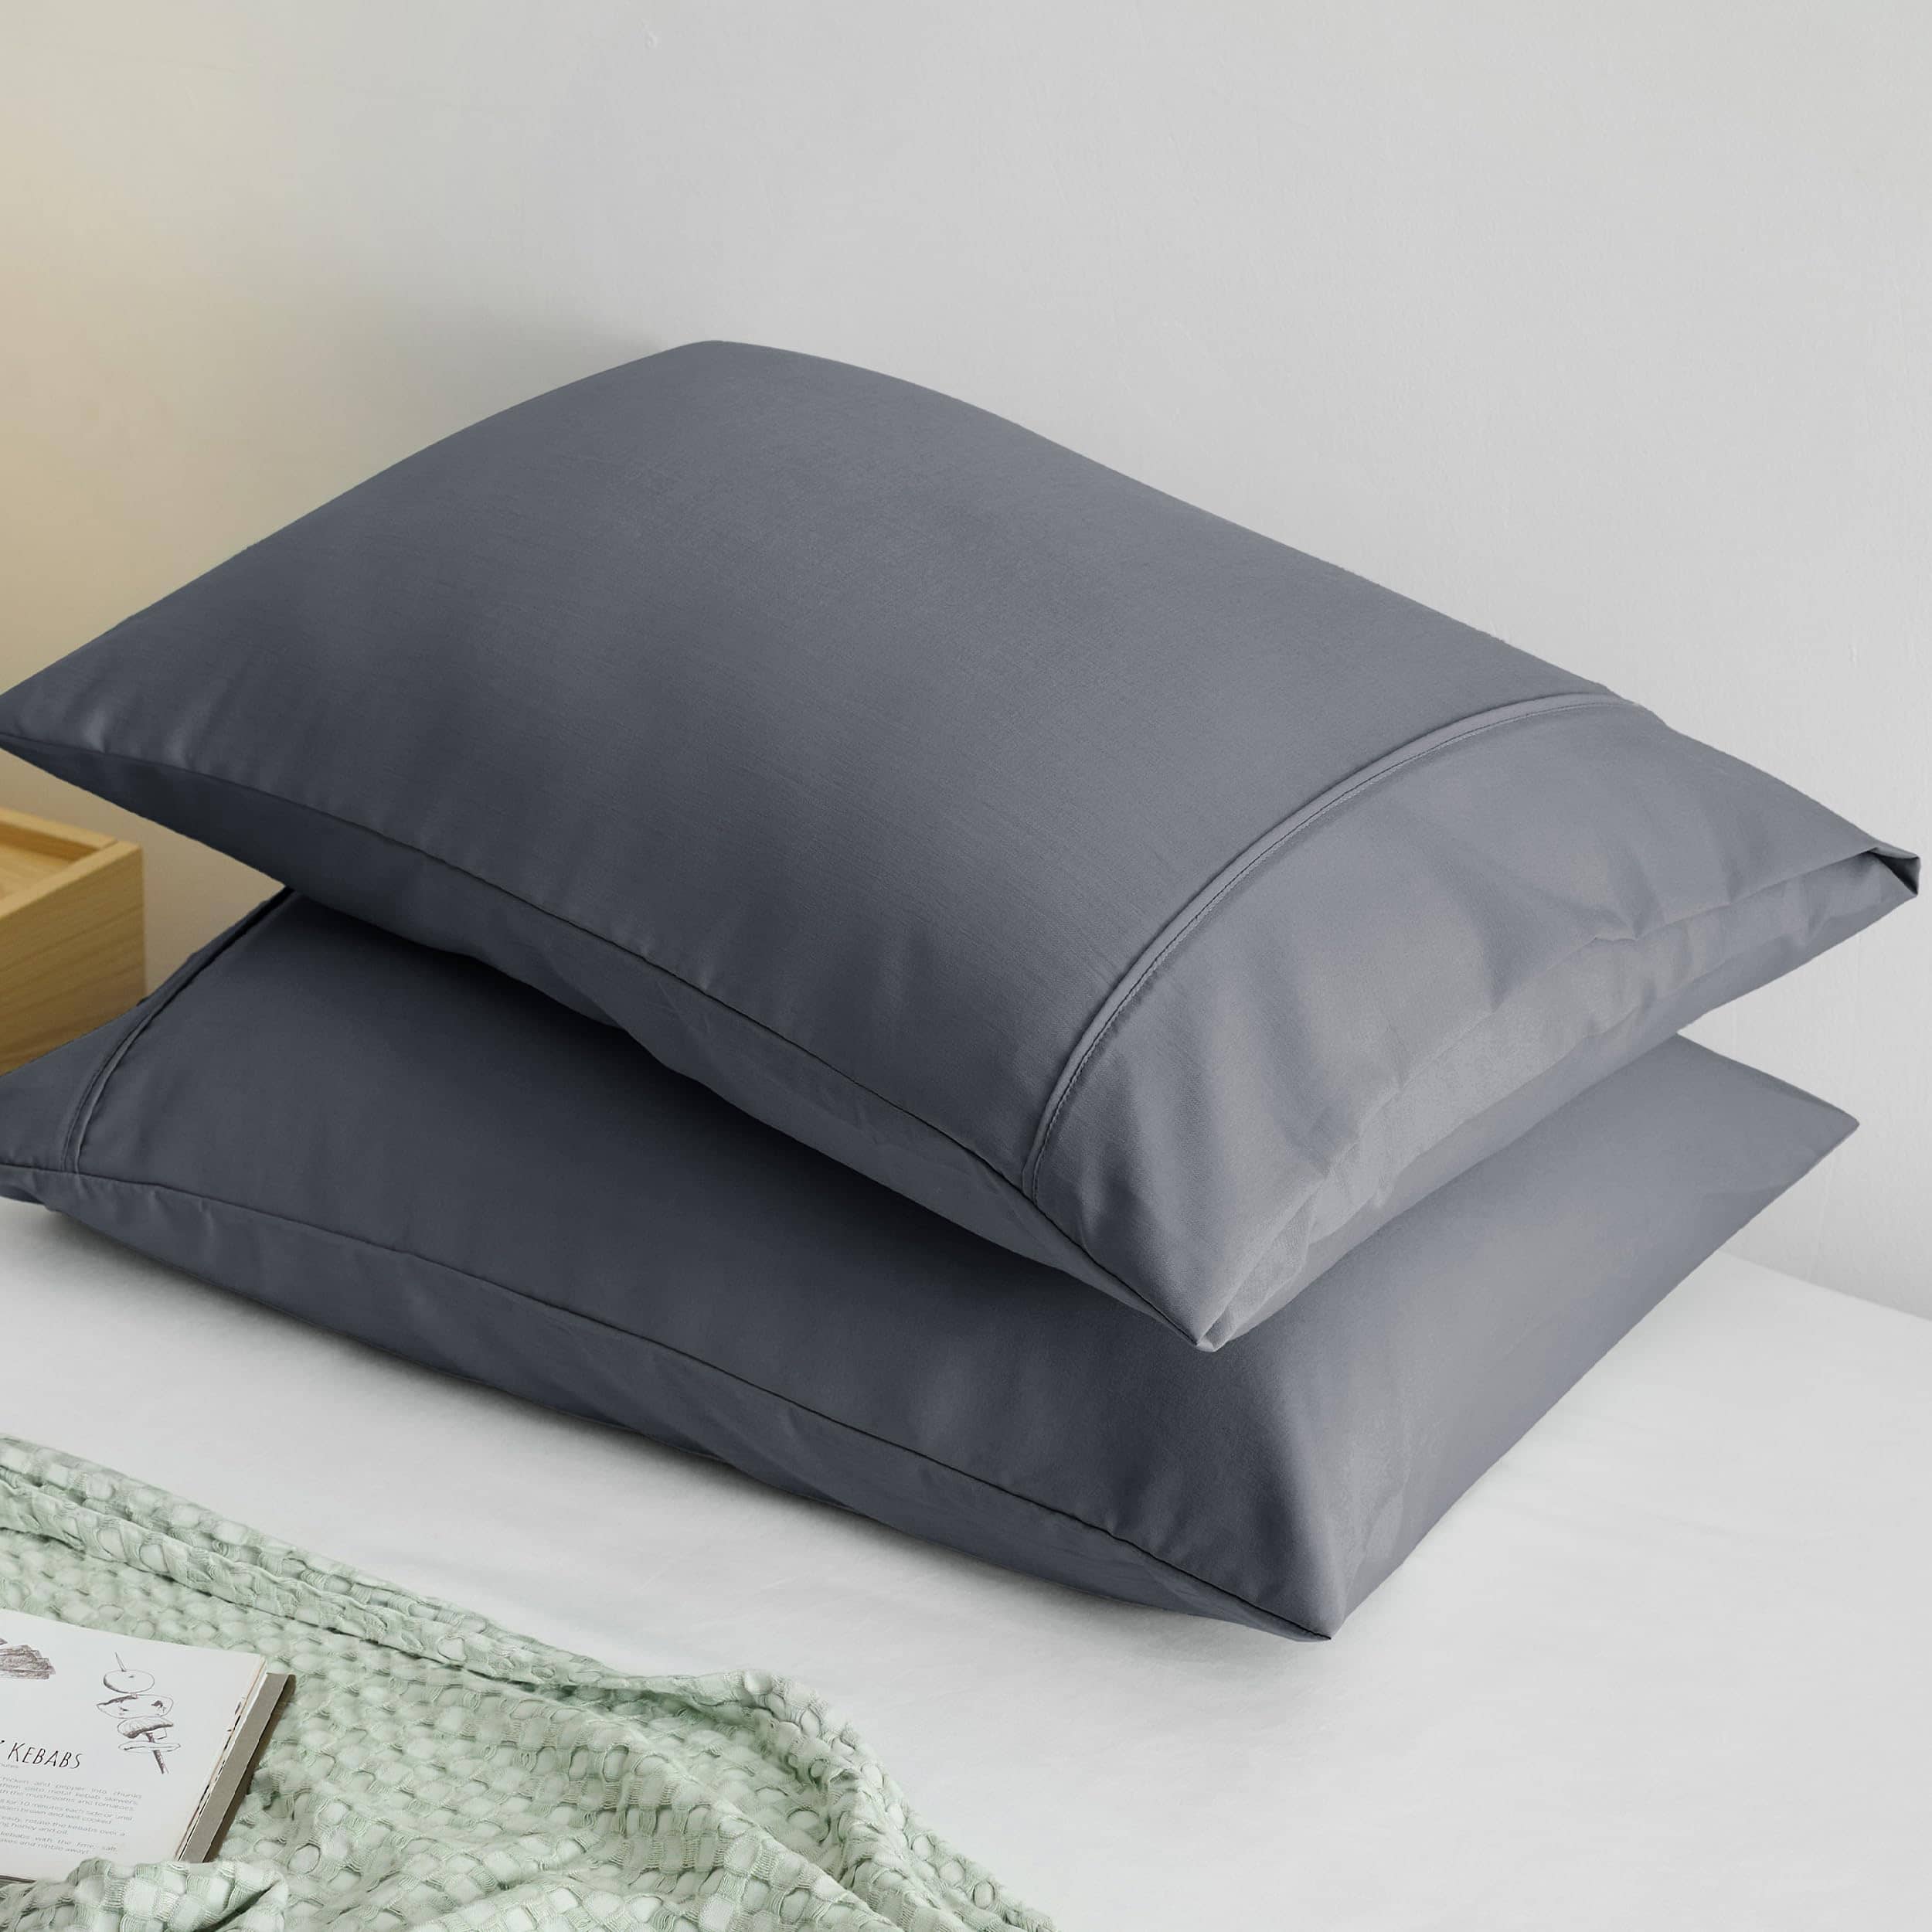 Pillowcases Polyester and Rayon Derived from Bamboo Blend